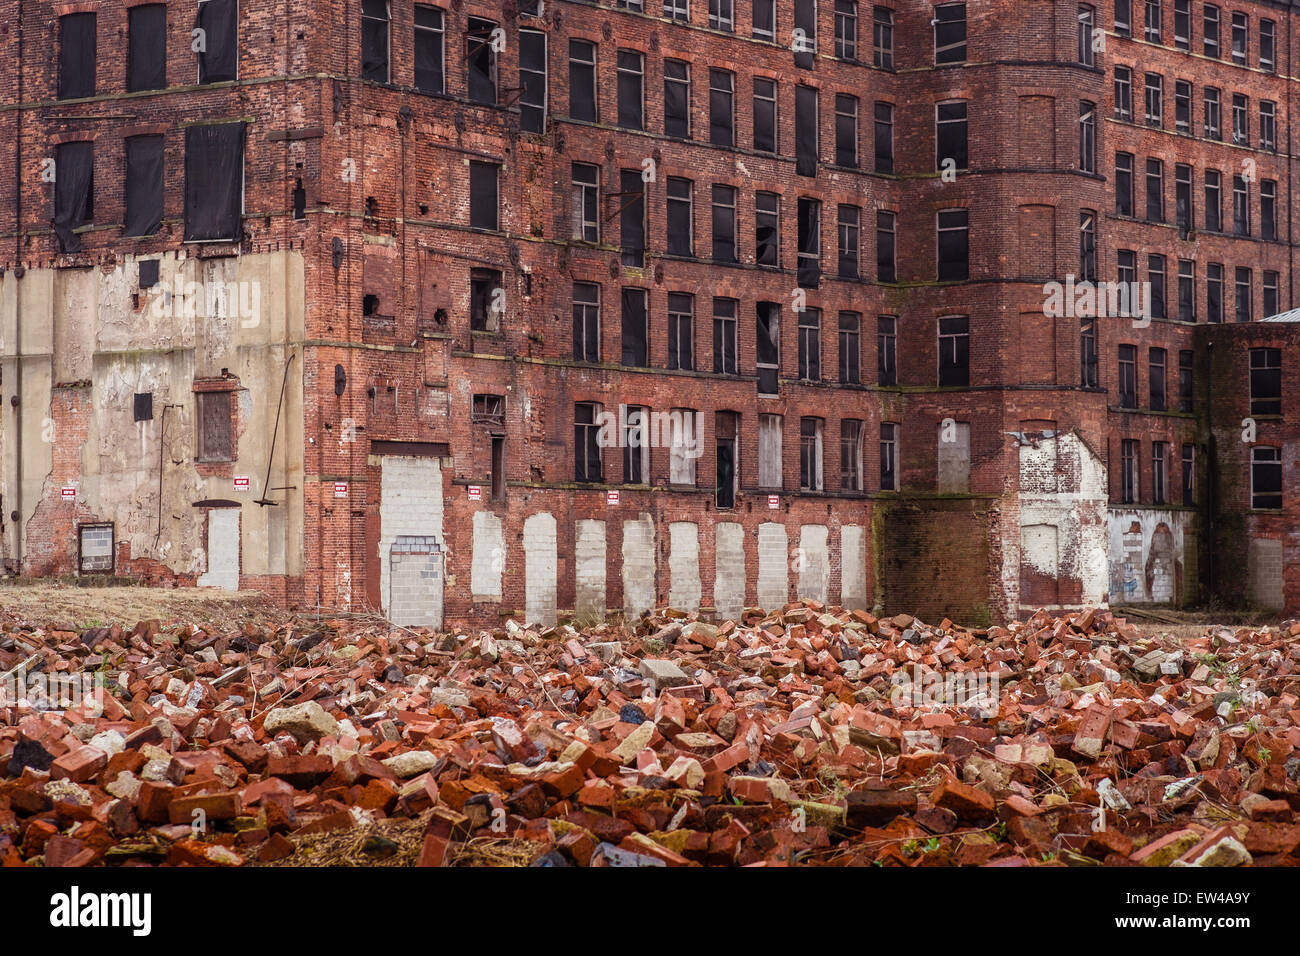 Hunslet Mill in Leeds, surrounded by piles of bricks and rubble from demolished buildings. Stock Photo